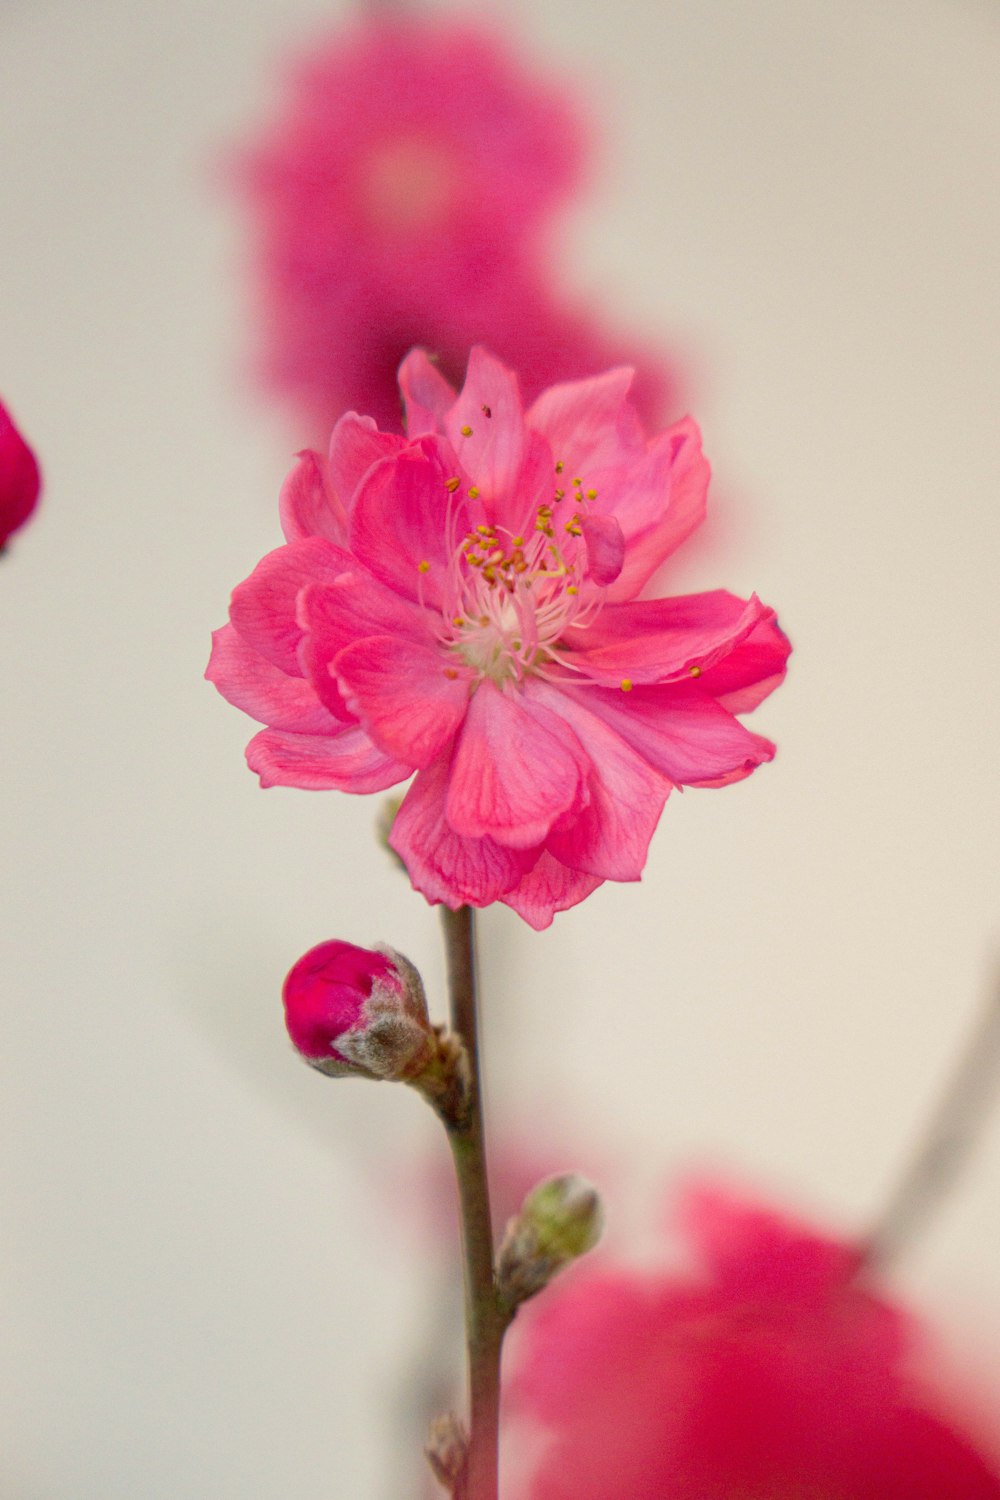 a close up of a pink flower on a stem